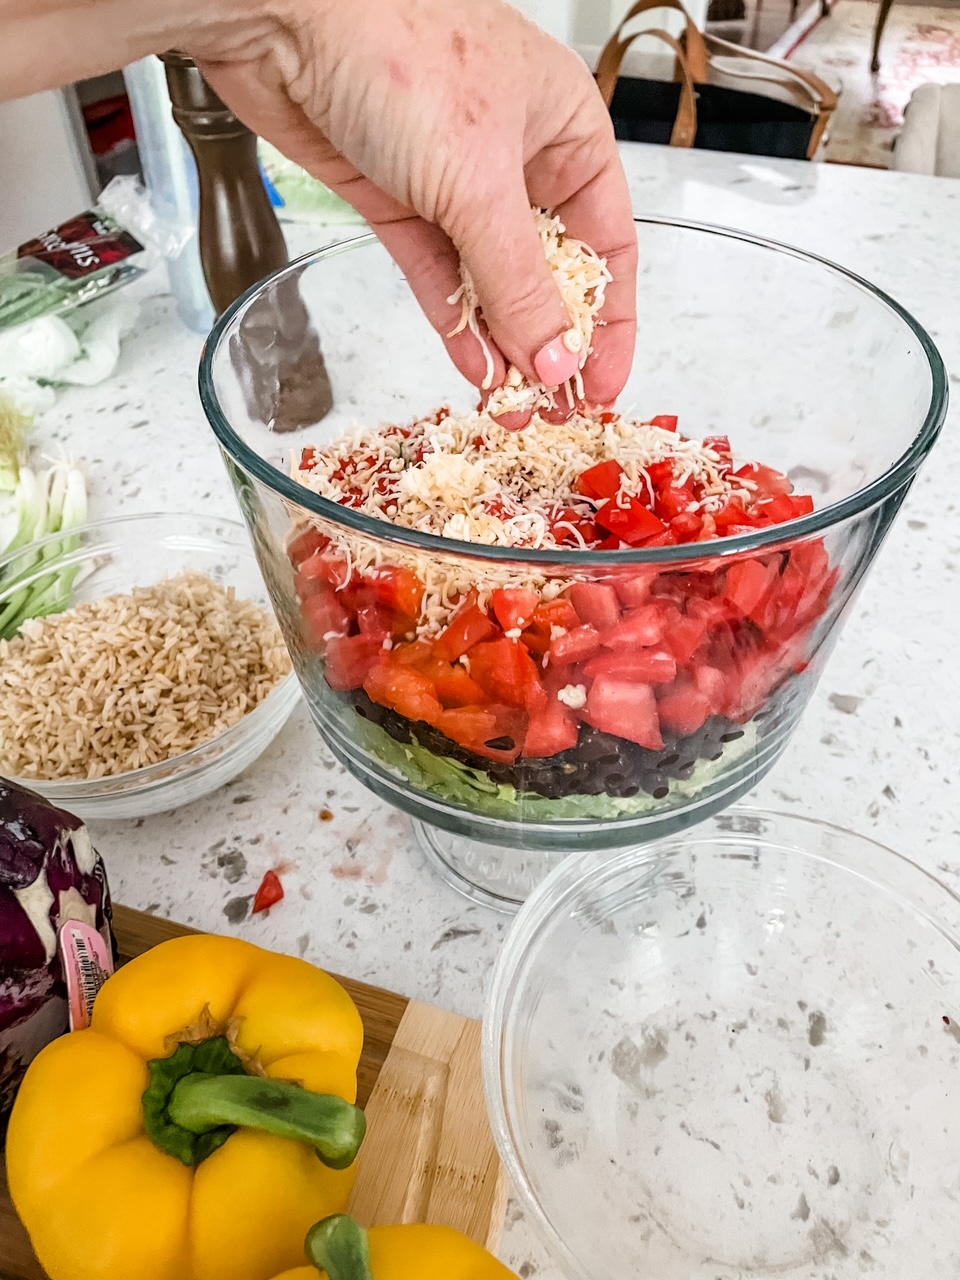 A hand adding ingredients to the trifle bowl in a layered pattern